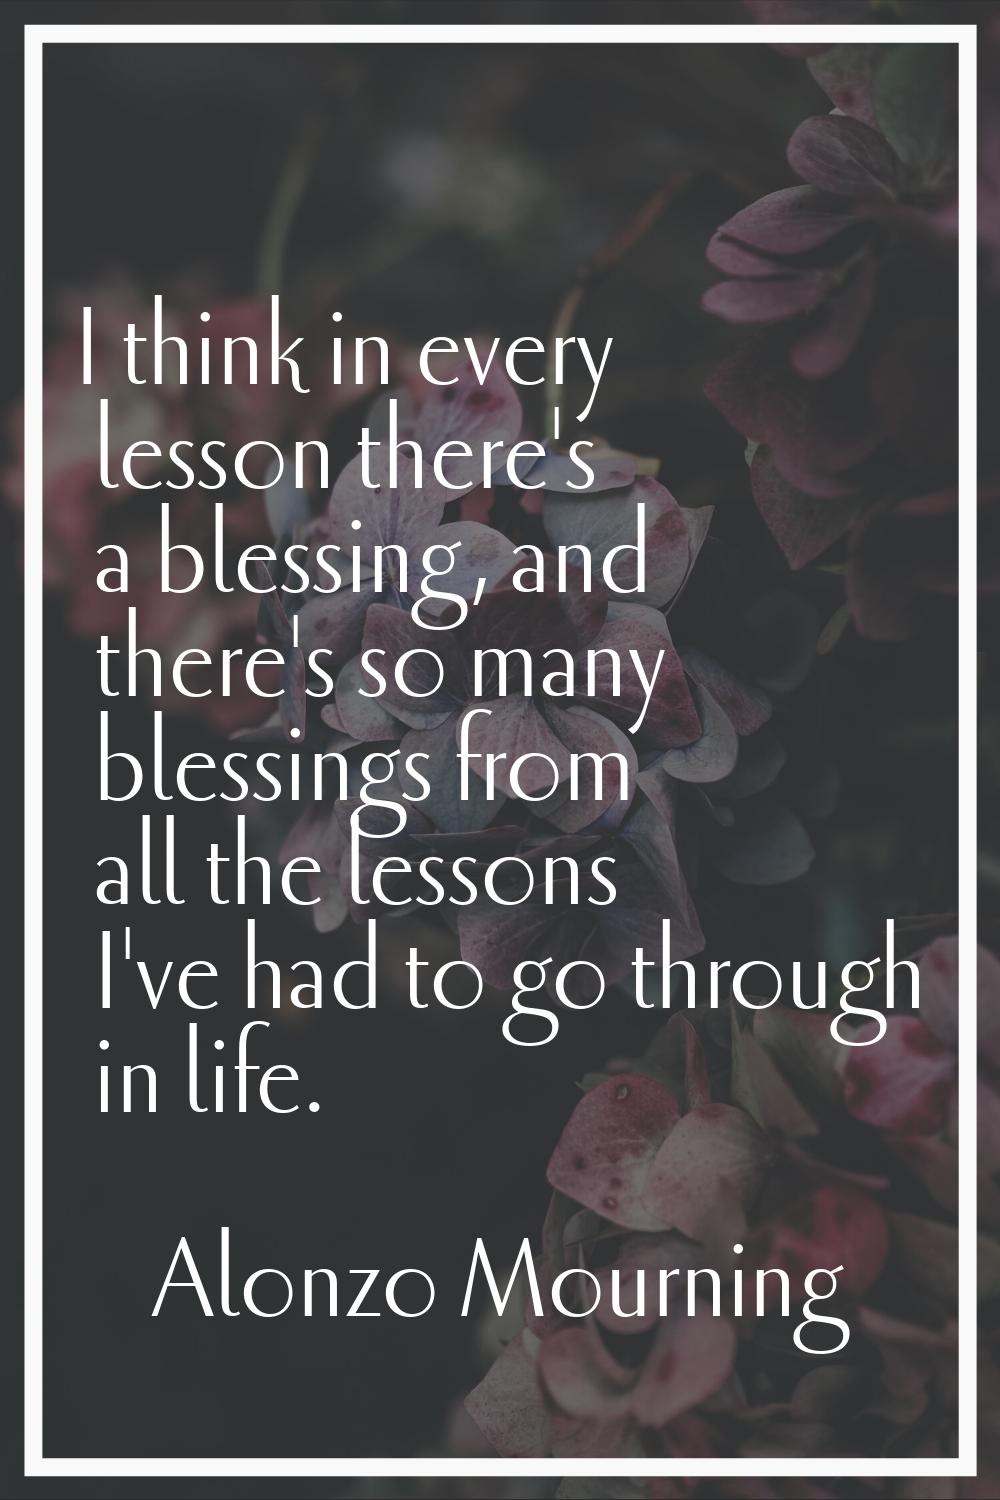 I think in every lesson there's a blessing, and there's so many blessings from all the lessons I've